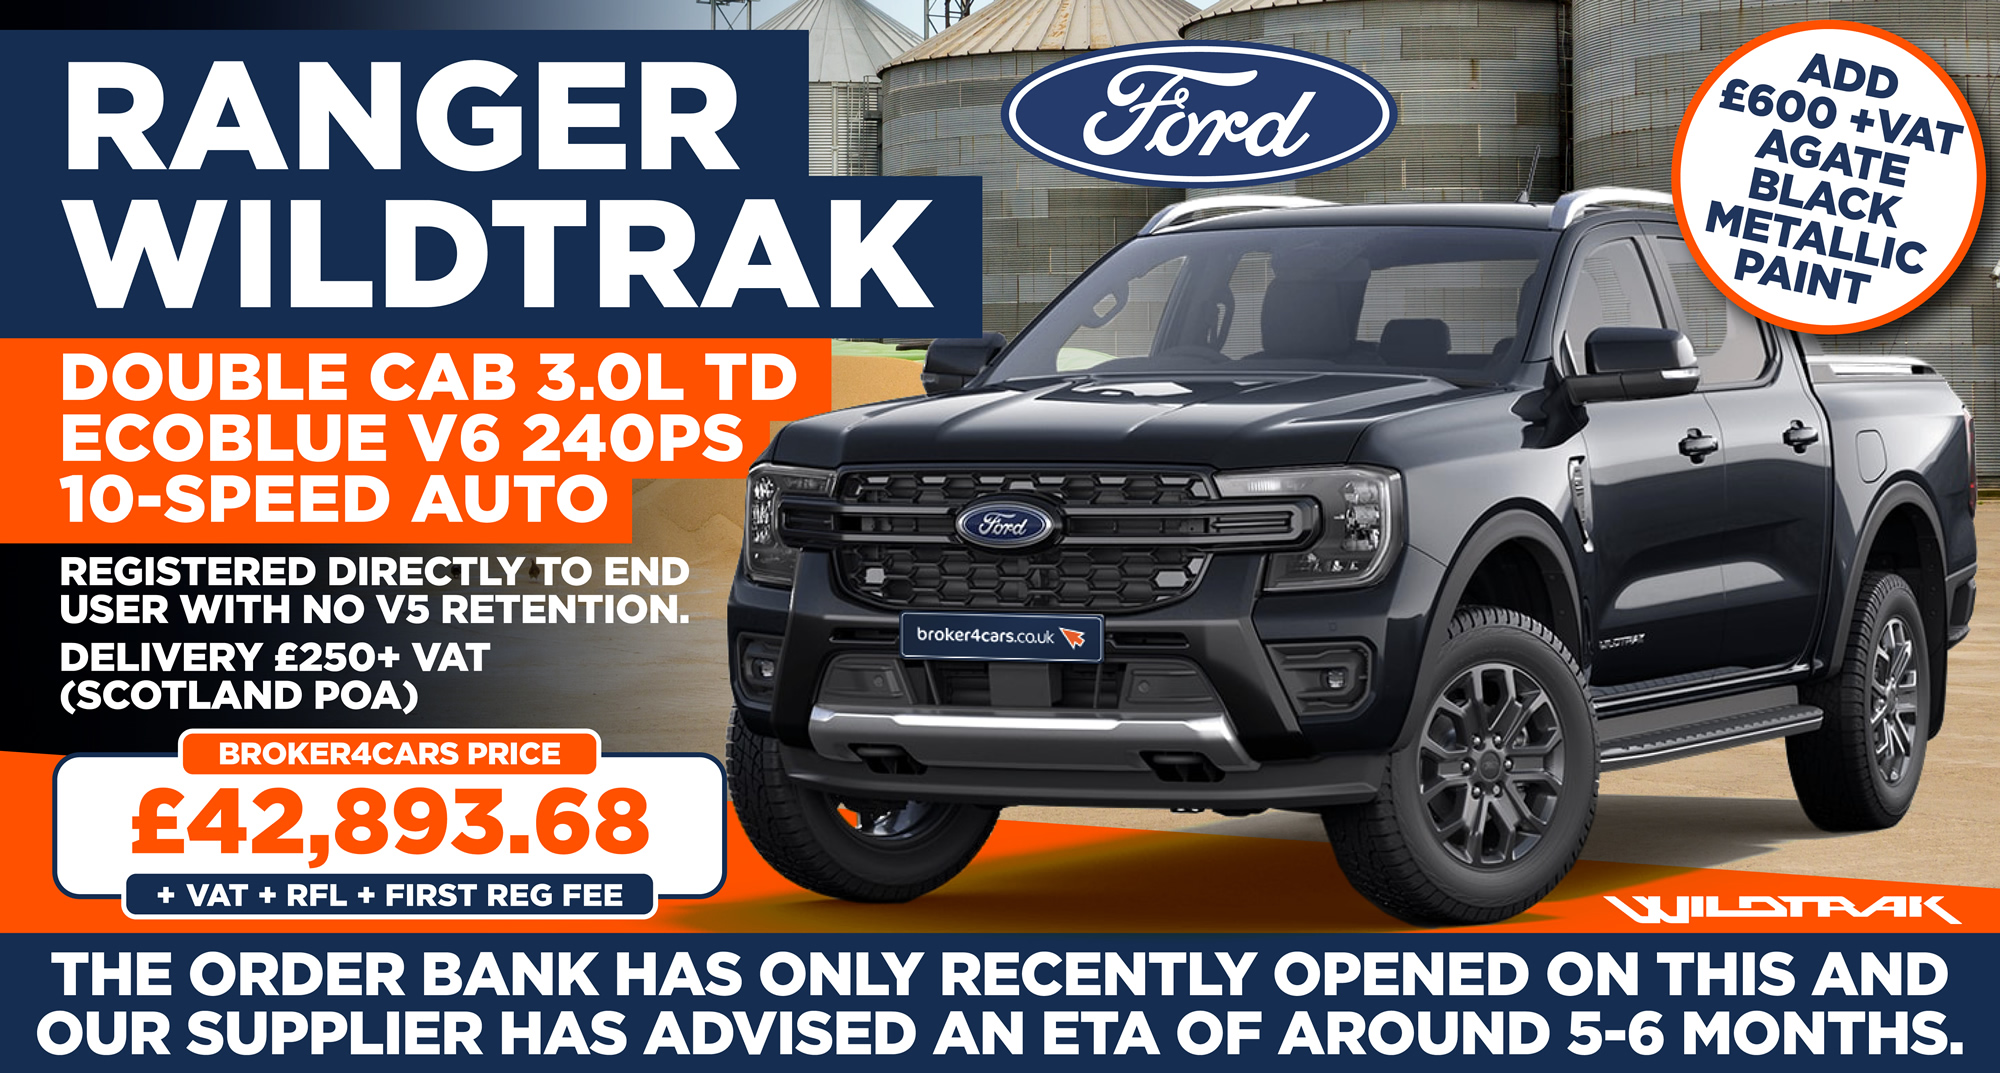 Ranger Wildtrak 3.0L TD Ecoblue V6 240PS10-Speed Automatic, Available in Agate Black and Carbonised Grey